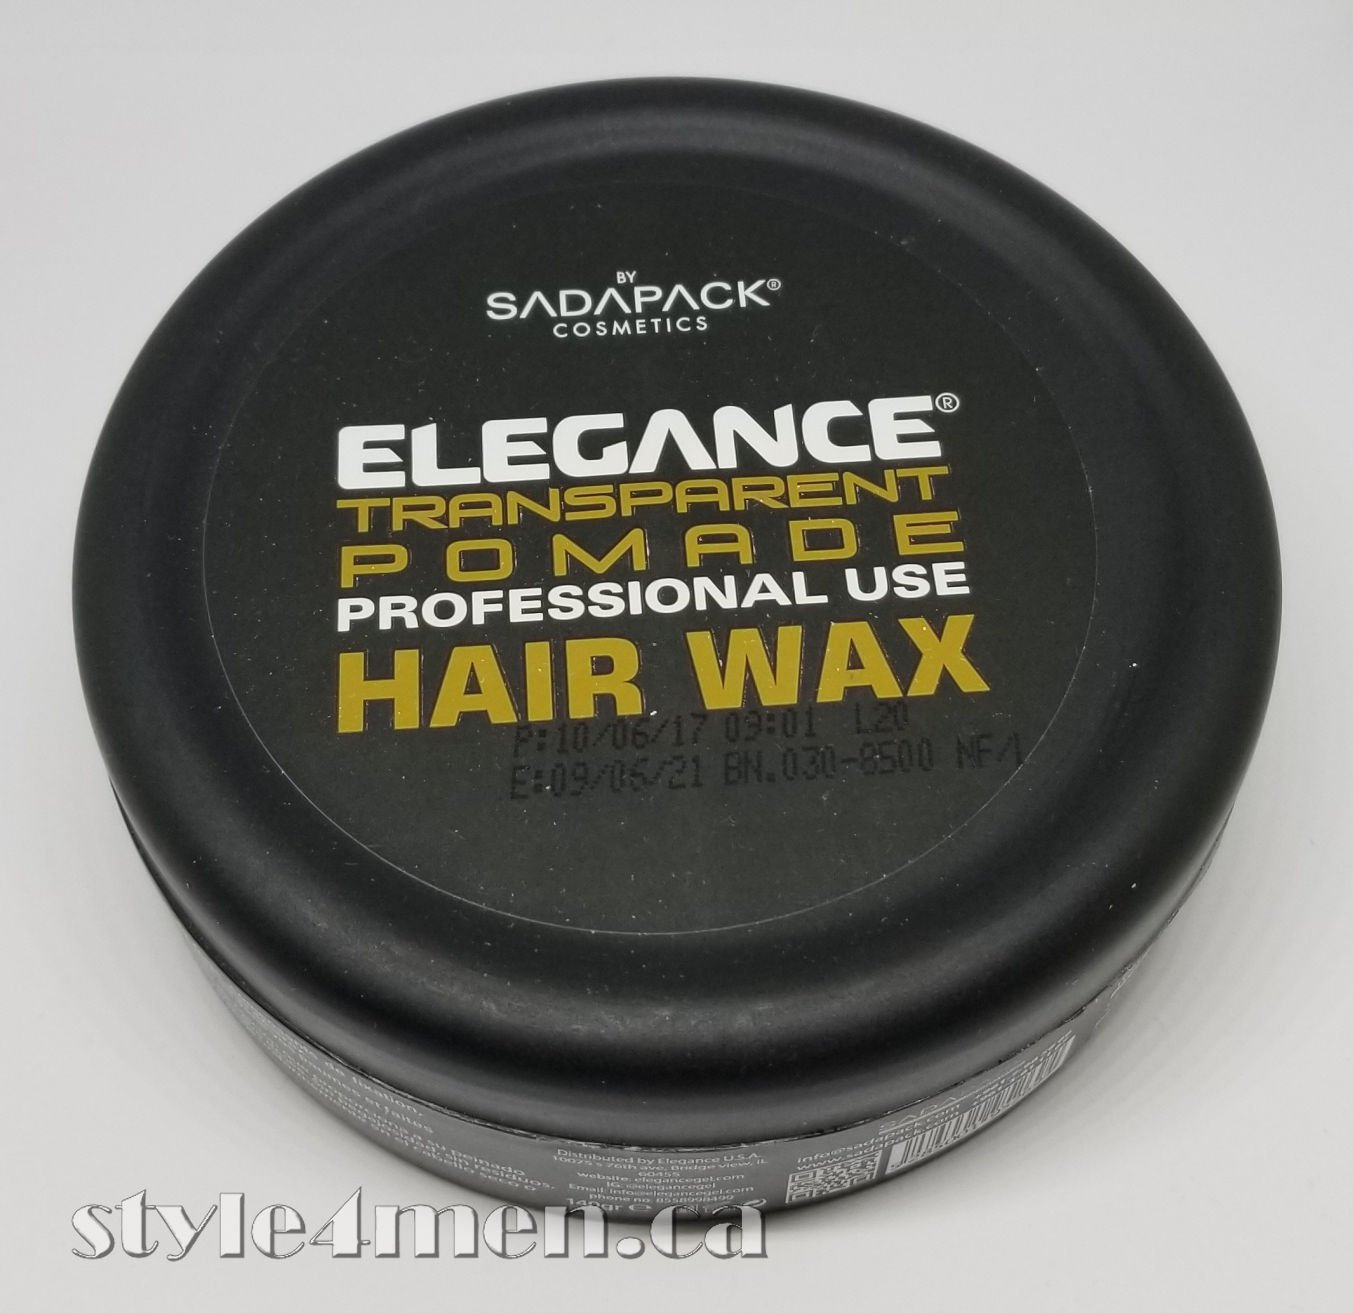 ELEGANCE Transparent Pomade Hair Wax – Serious hold for every man